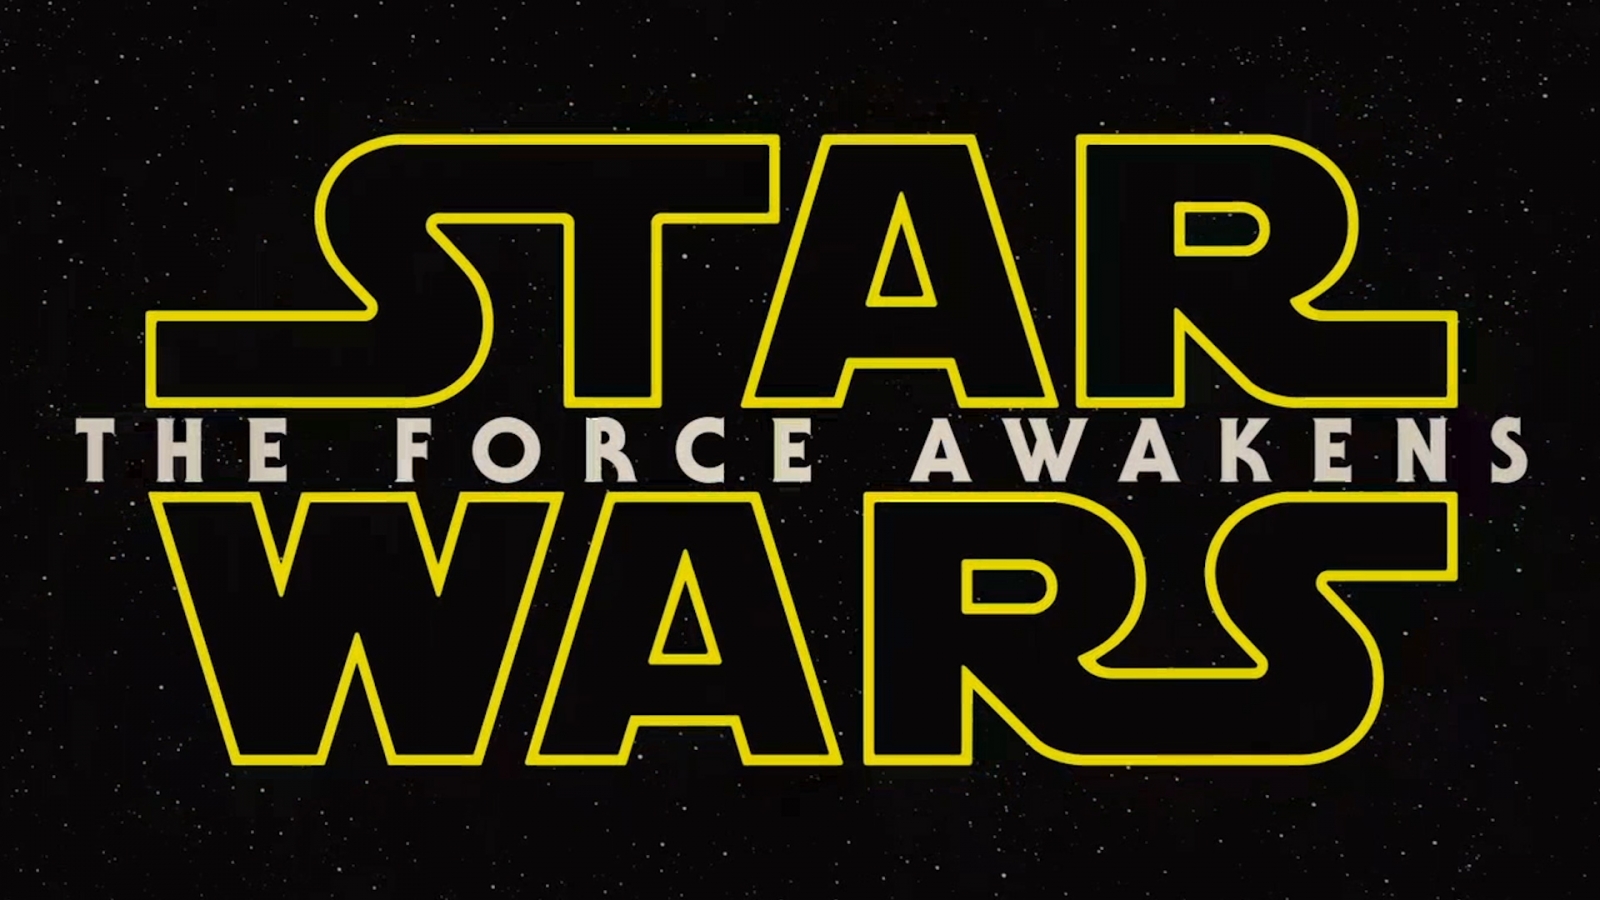 watch star wars the force awakens full movie leaked online